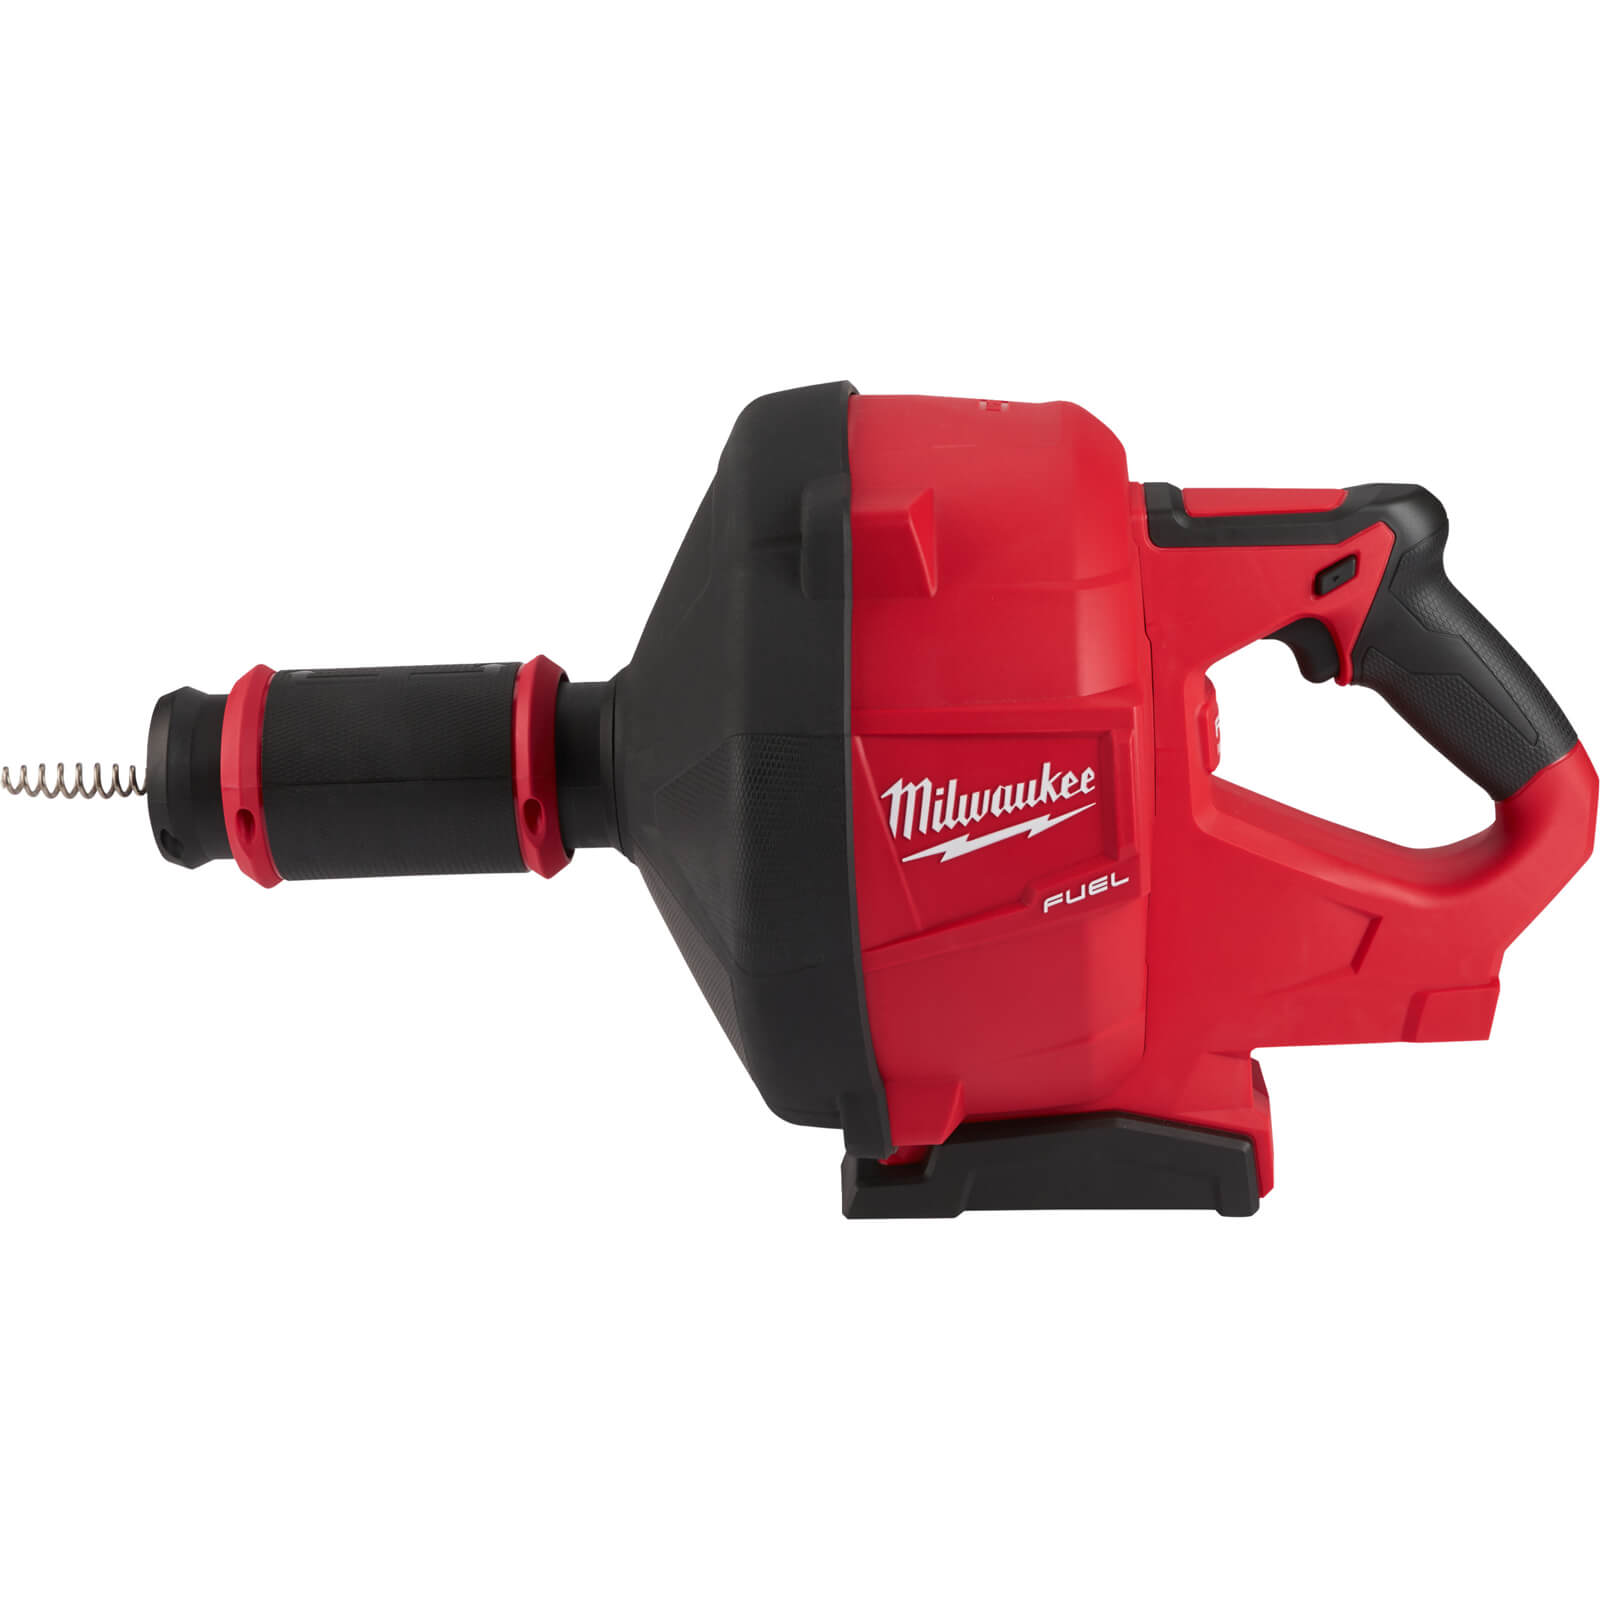 Image of Milwaukee M18 FDCPF8 Fuel 18v Cordless Brushless Drain Cleaner No Batteries No Charger No Case